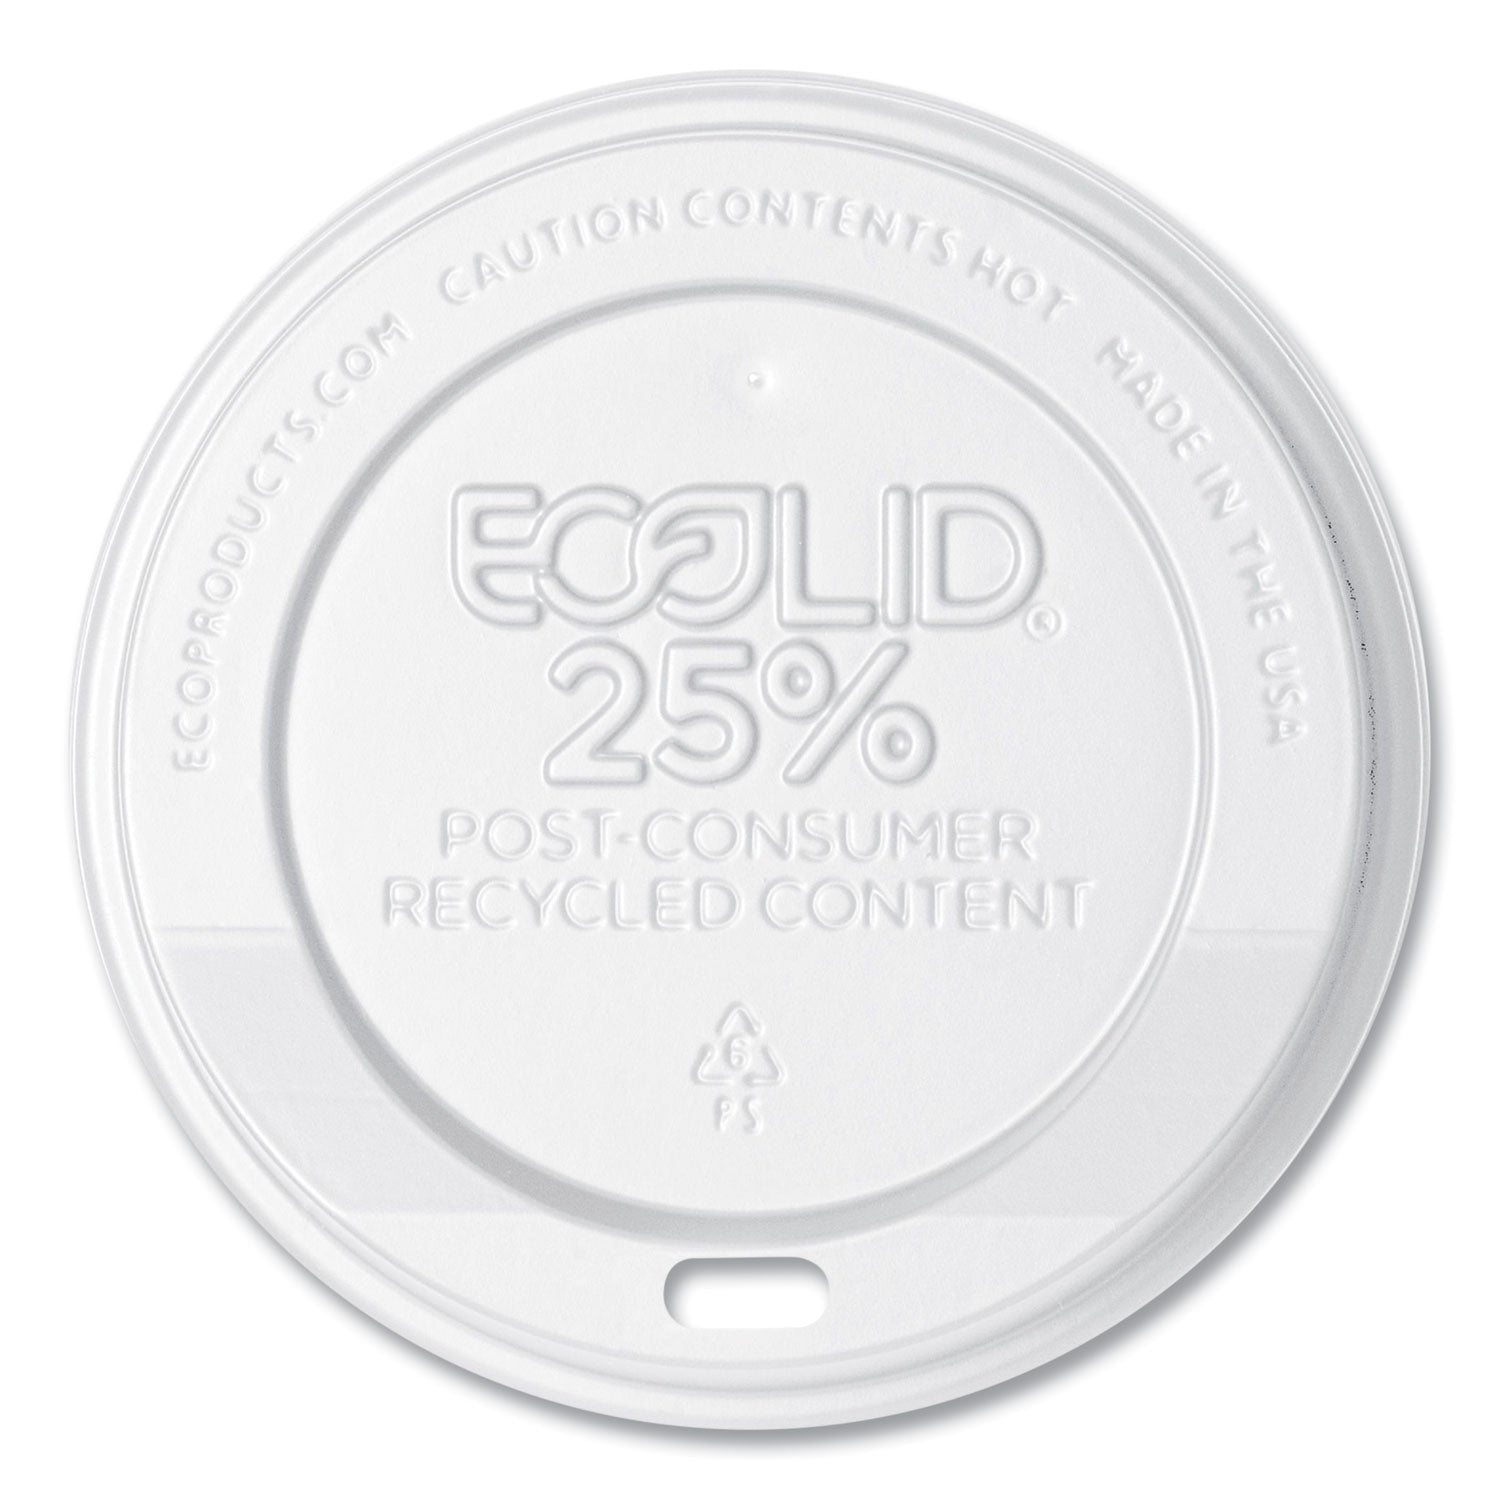 EcoLid 25% Recycled Content Hot Cup Lid, White, Fits 10 oz to 20 oz Cups, 100/Pack, 10 Packs/Carton - 